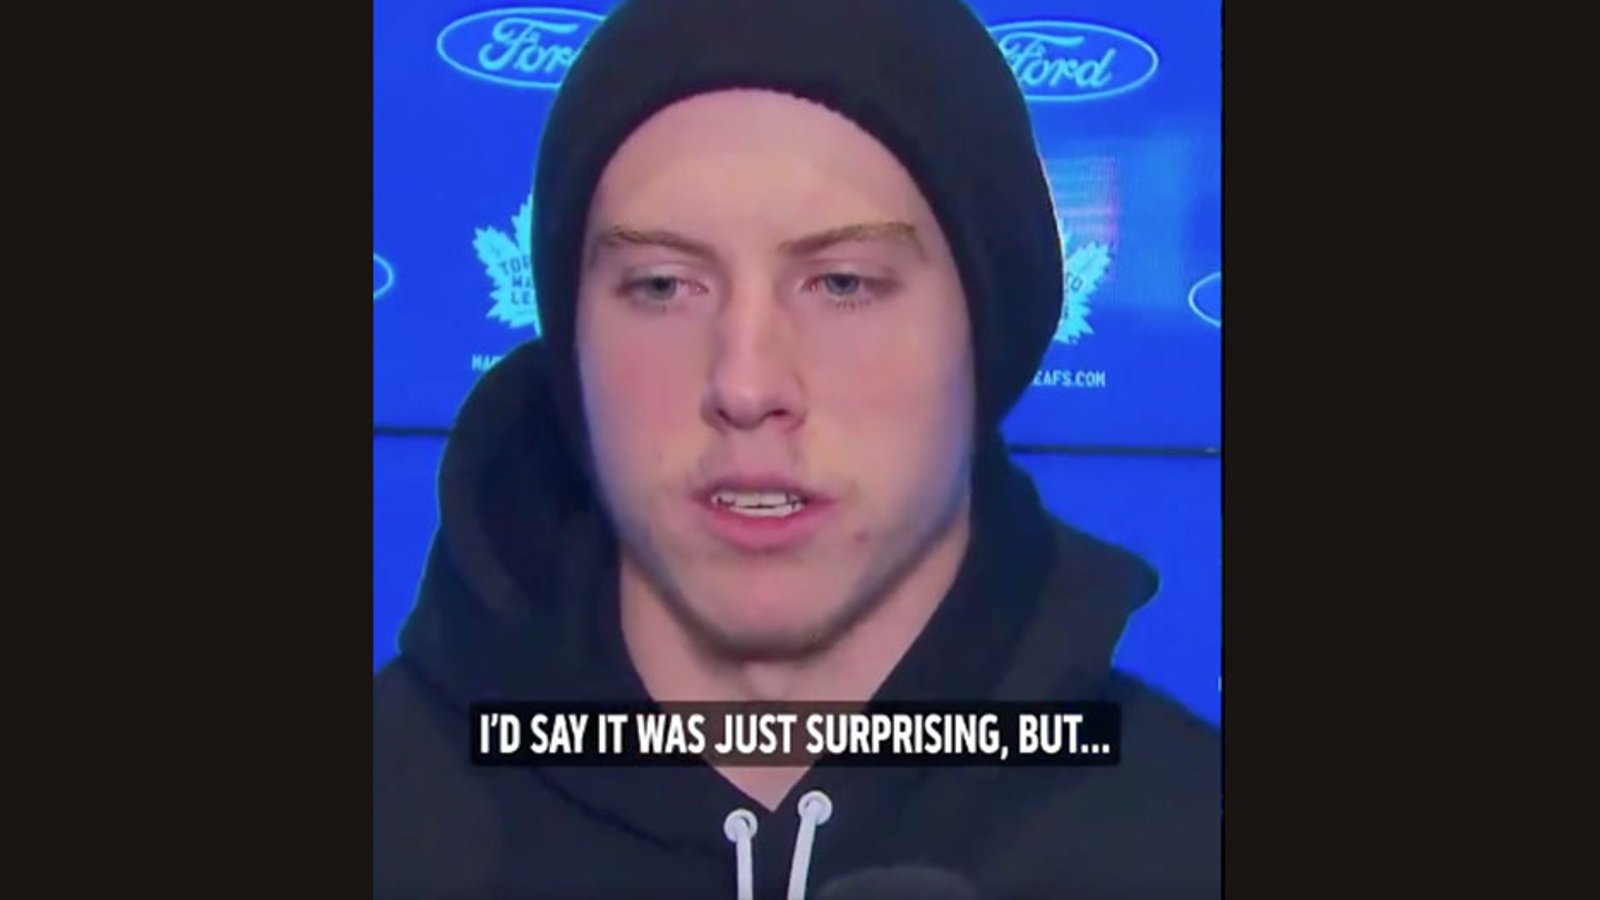 Marner speaks out on reports that Babcock forced him to tears during his rookie season